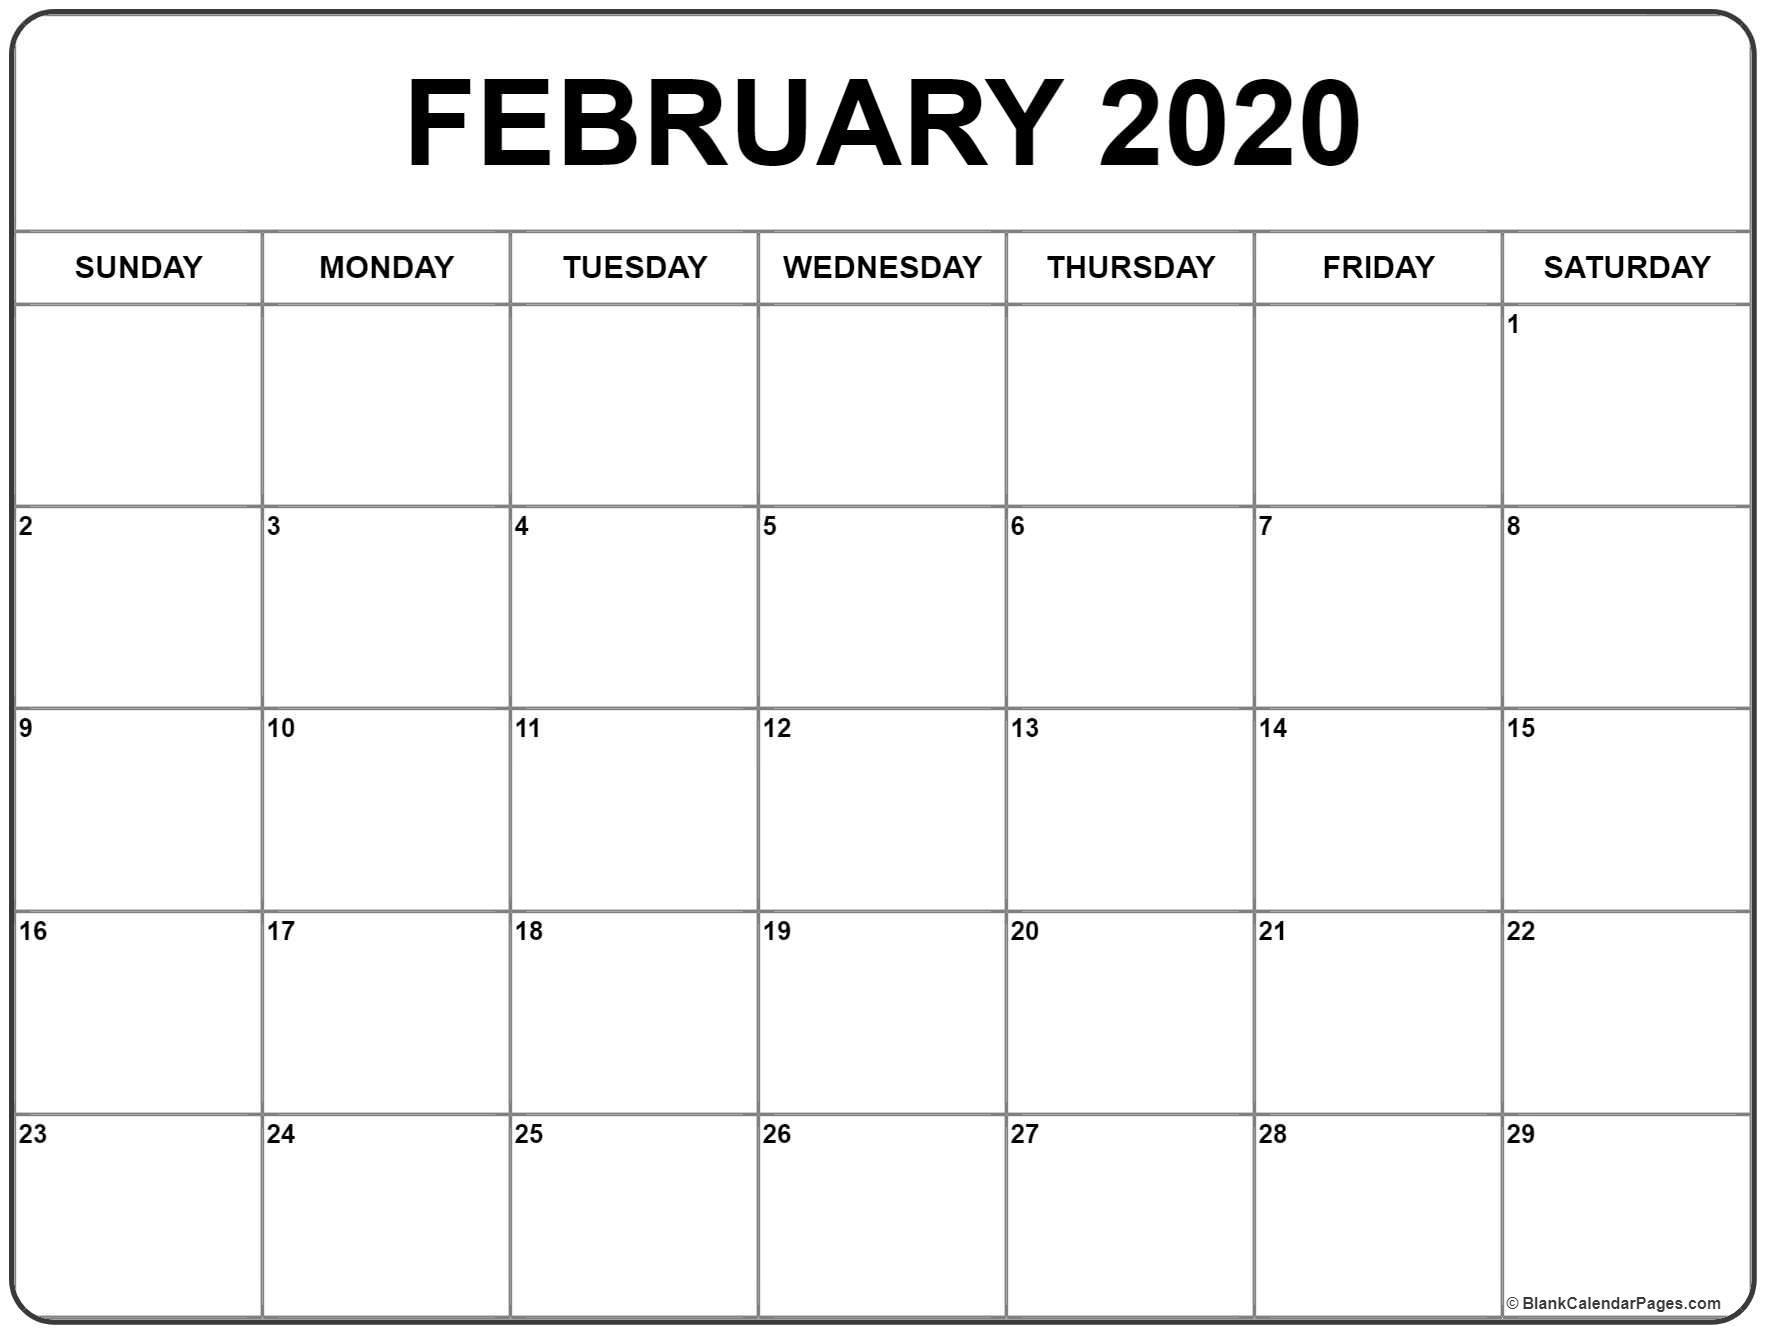 February 2020 Calendar | Free Printable Monthly Calendars pertaining to 2020 Calendars To Fill In